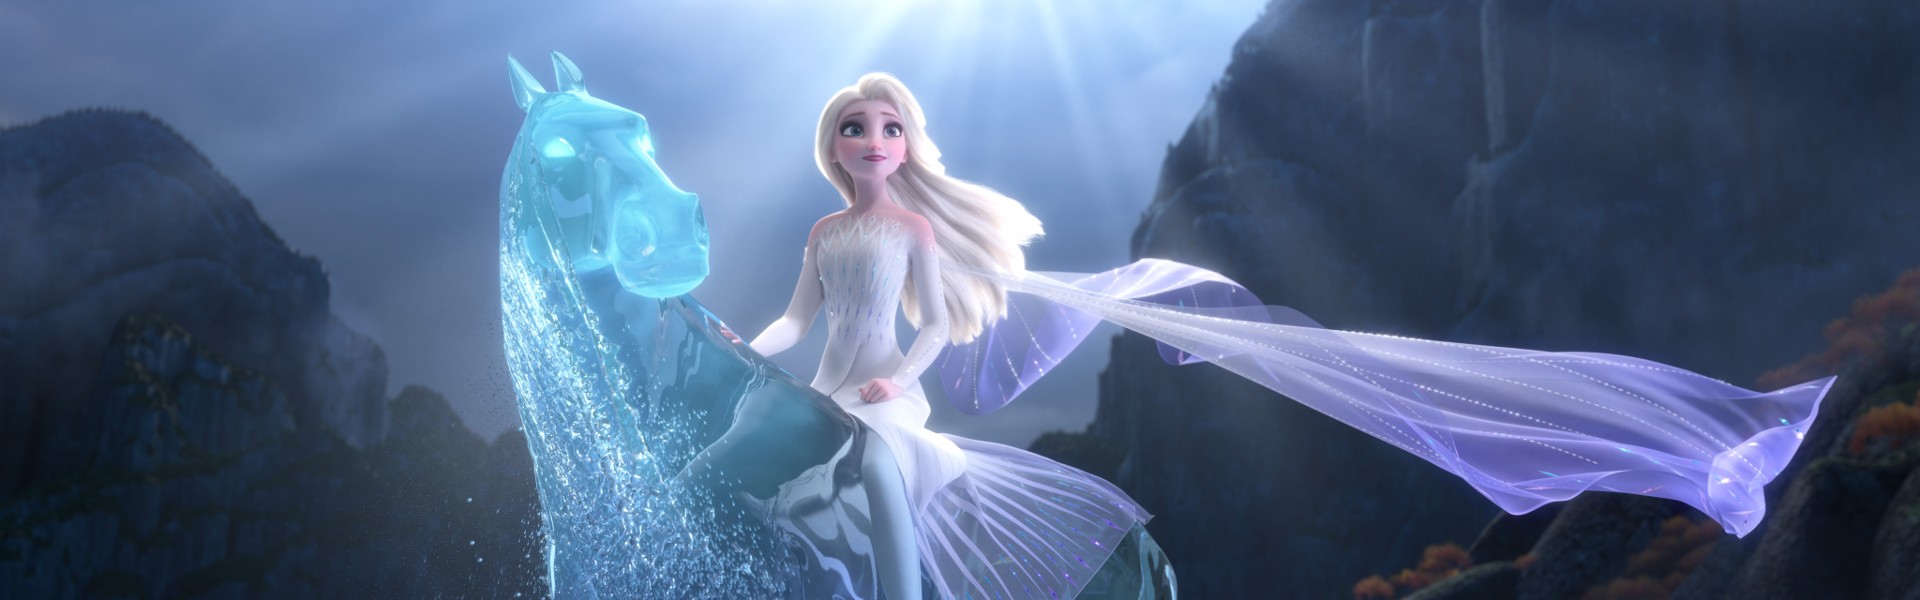 Frozen III isn’t even out yet, and a prequel is already in the works. You won’t be able to see anything yet